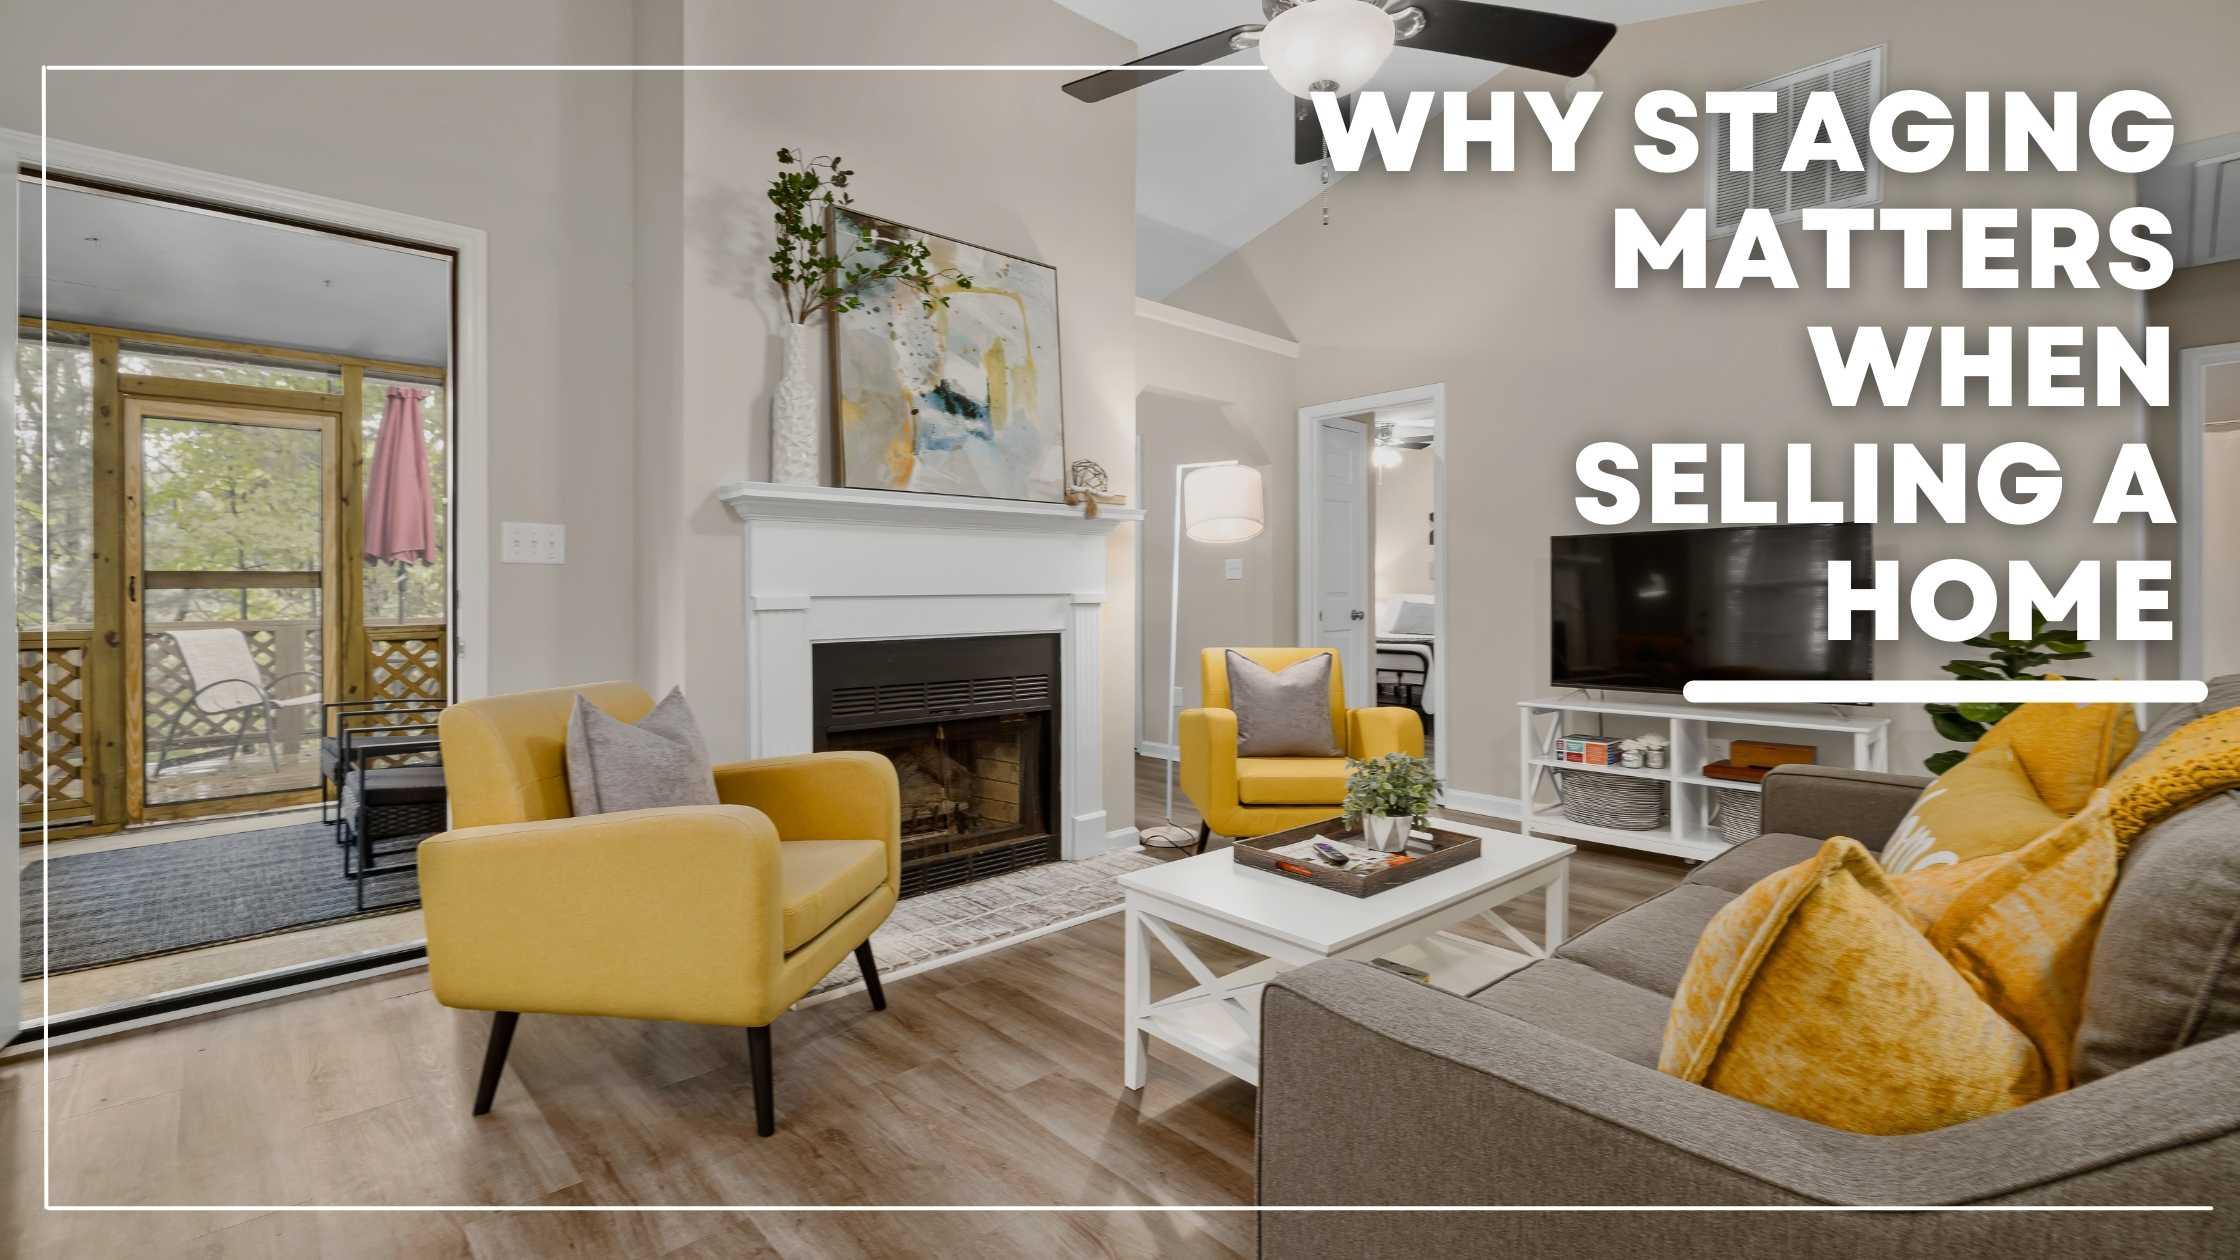 Why Staging Matters When Selling a Home